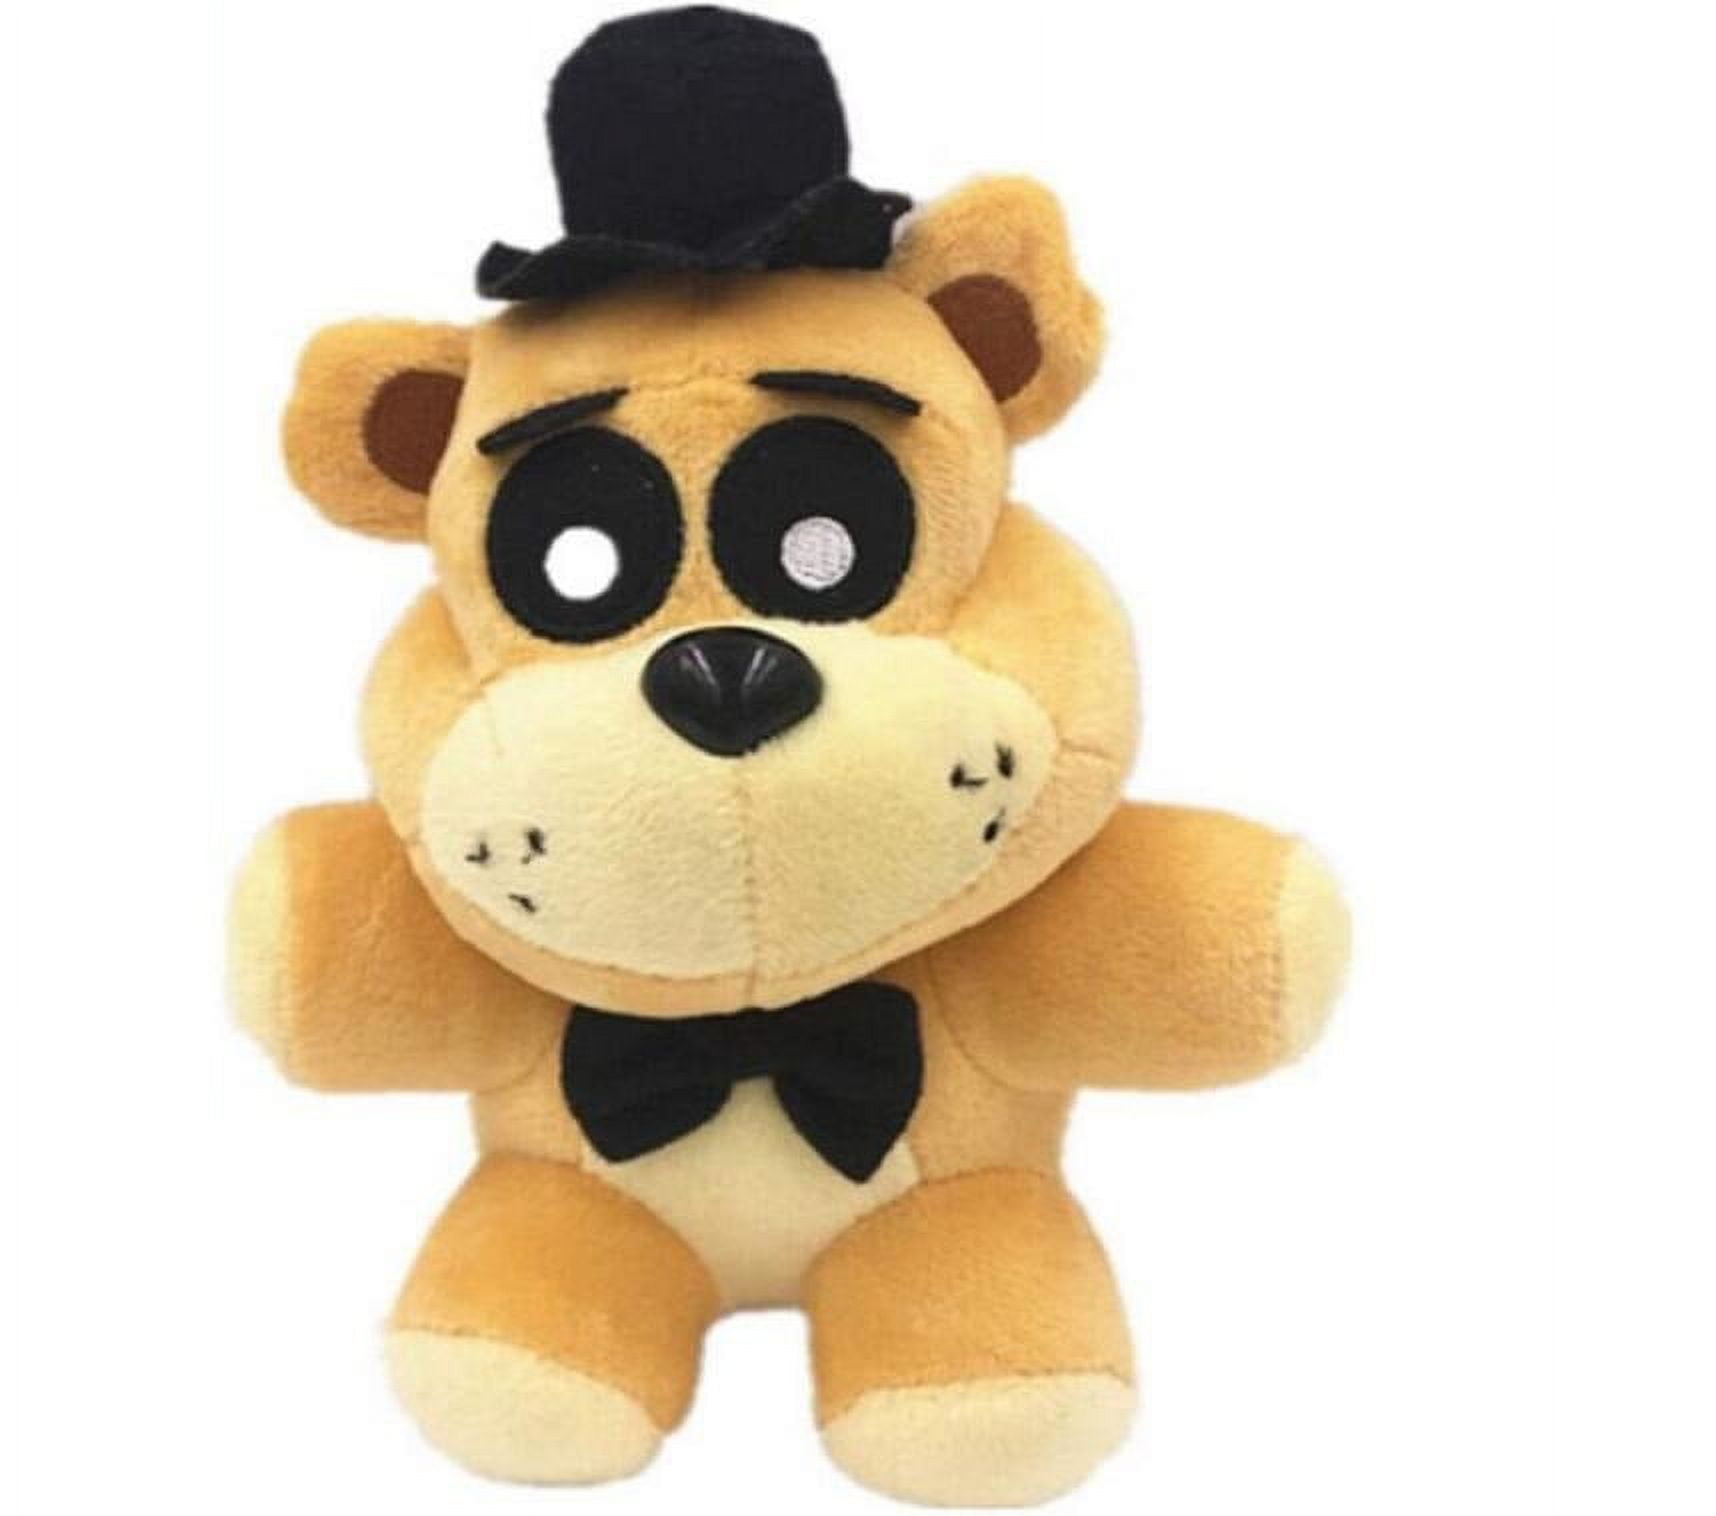 Cute and Safe fnaf plush golden freddy, Perfect for Gifting 